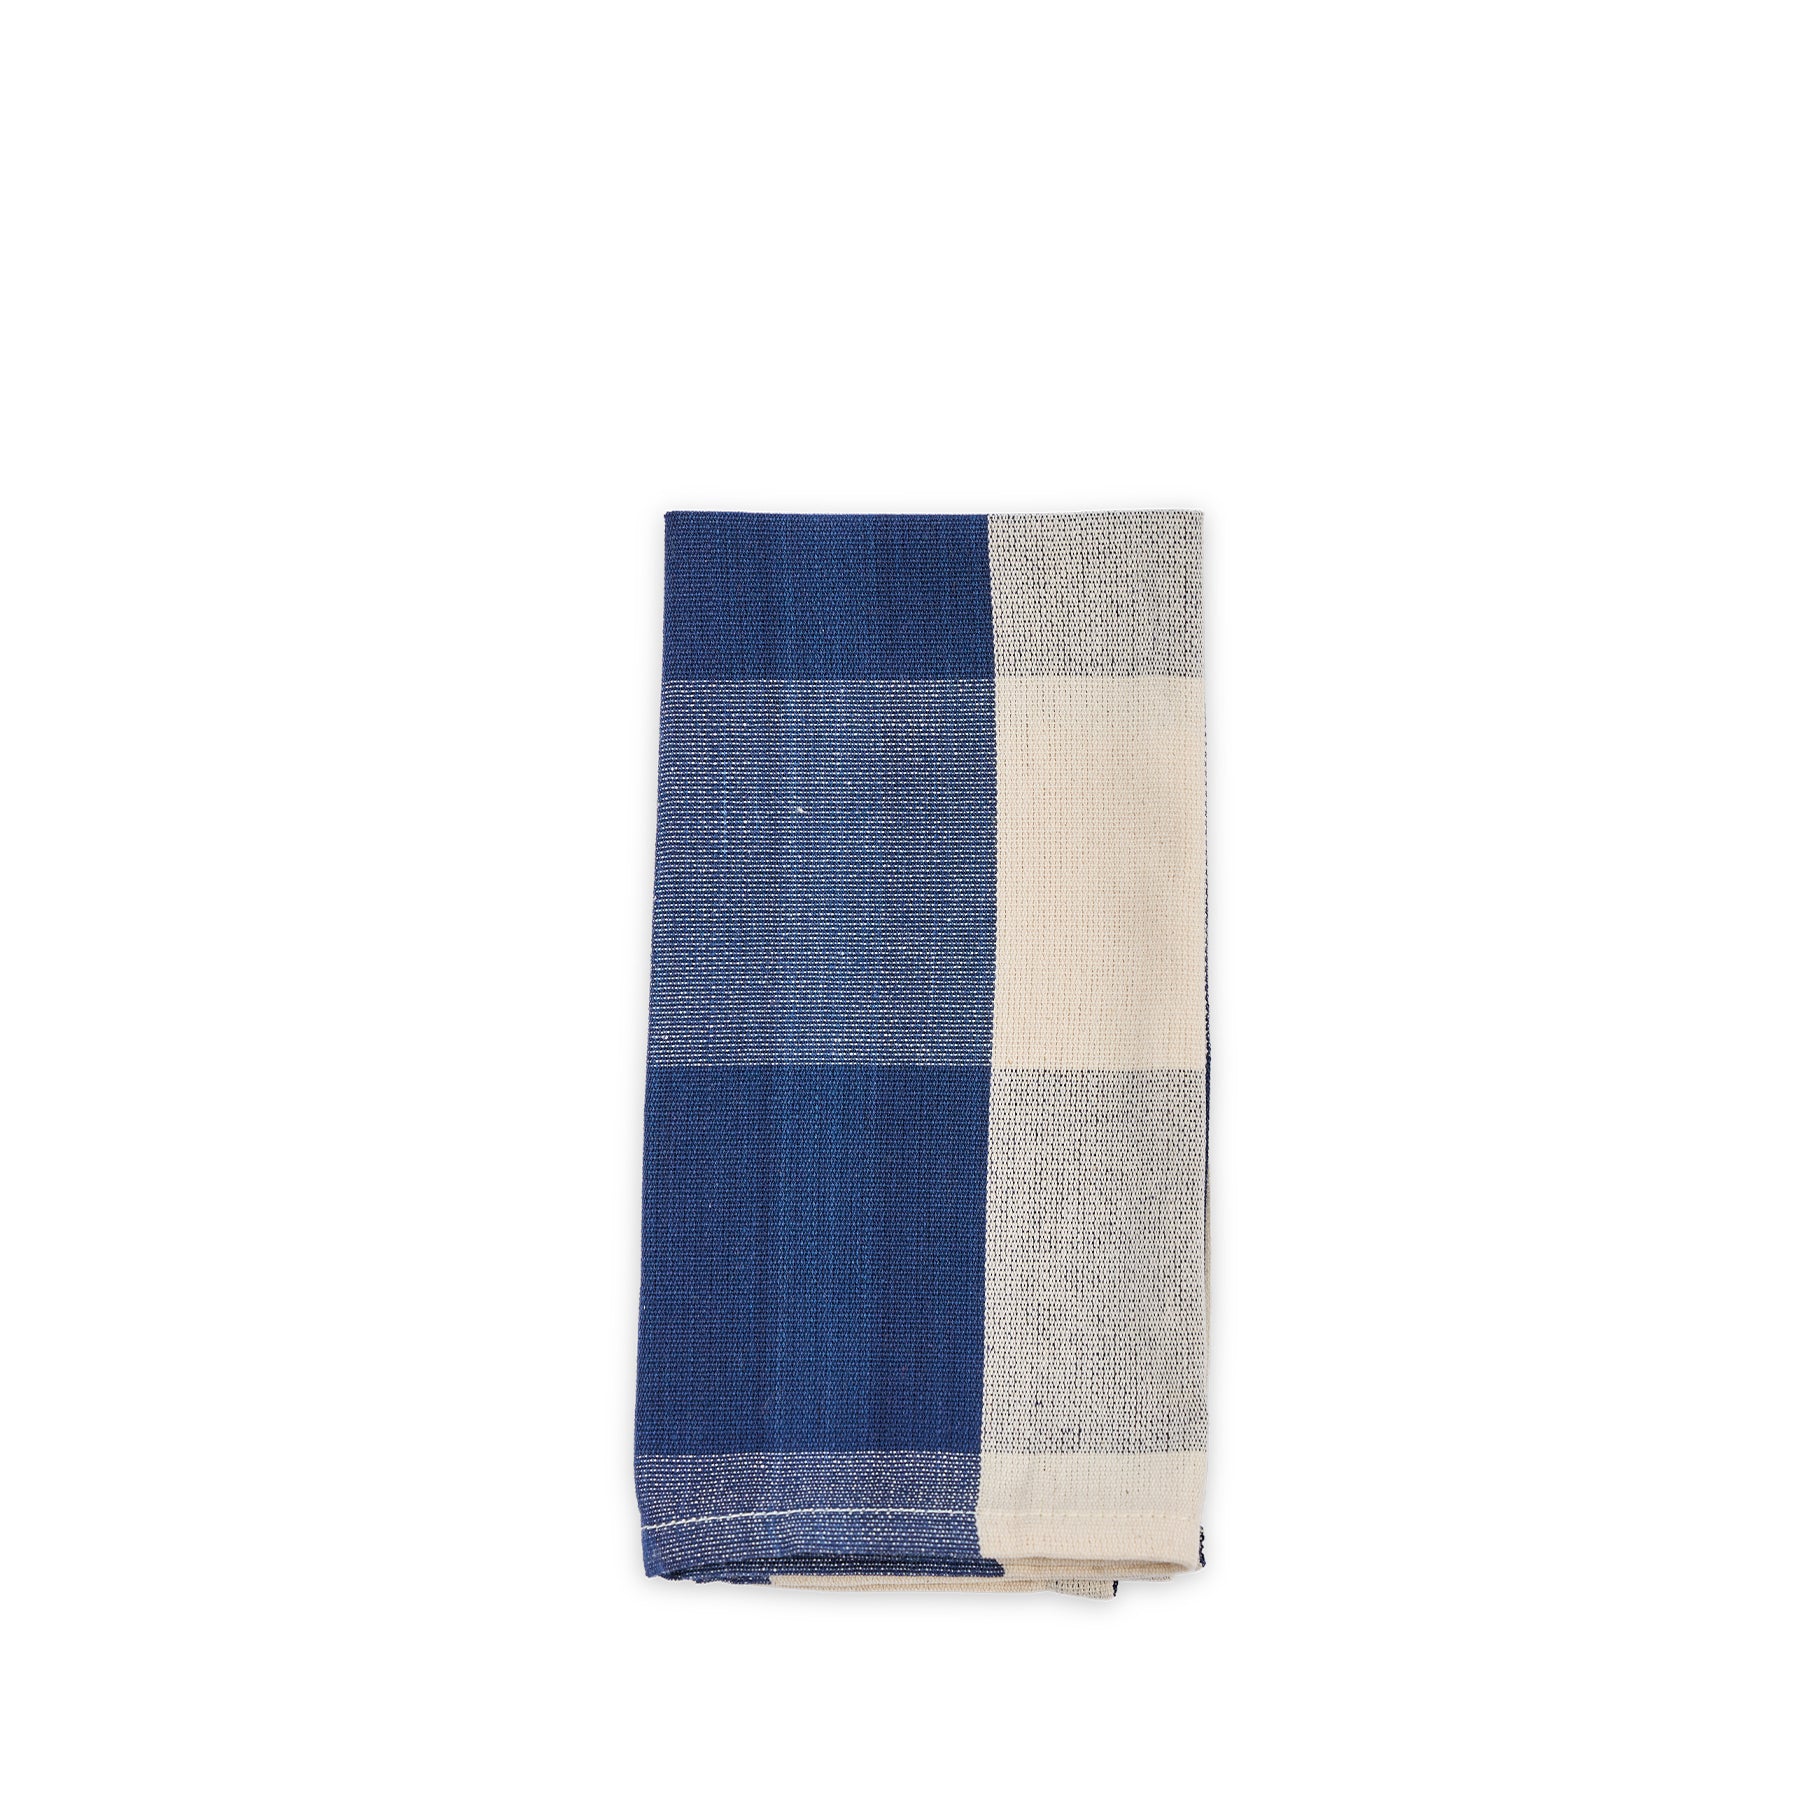 Cotton Check Napkin in Navy Blue and Off White Zoom Image 1